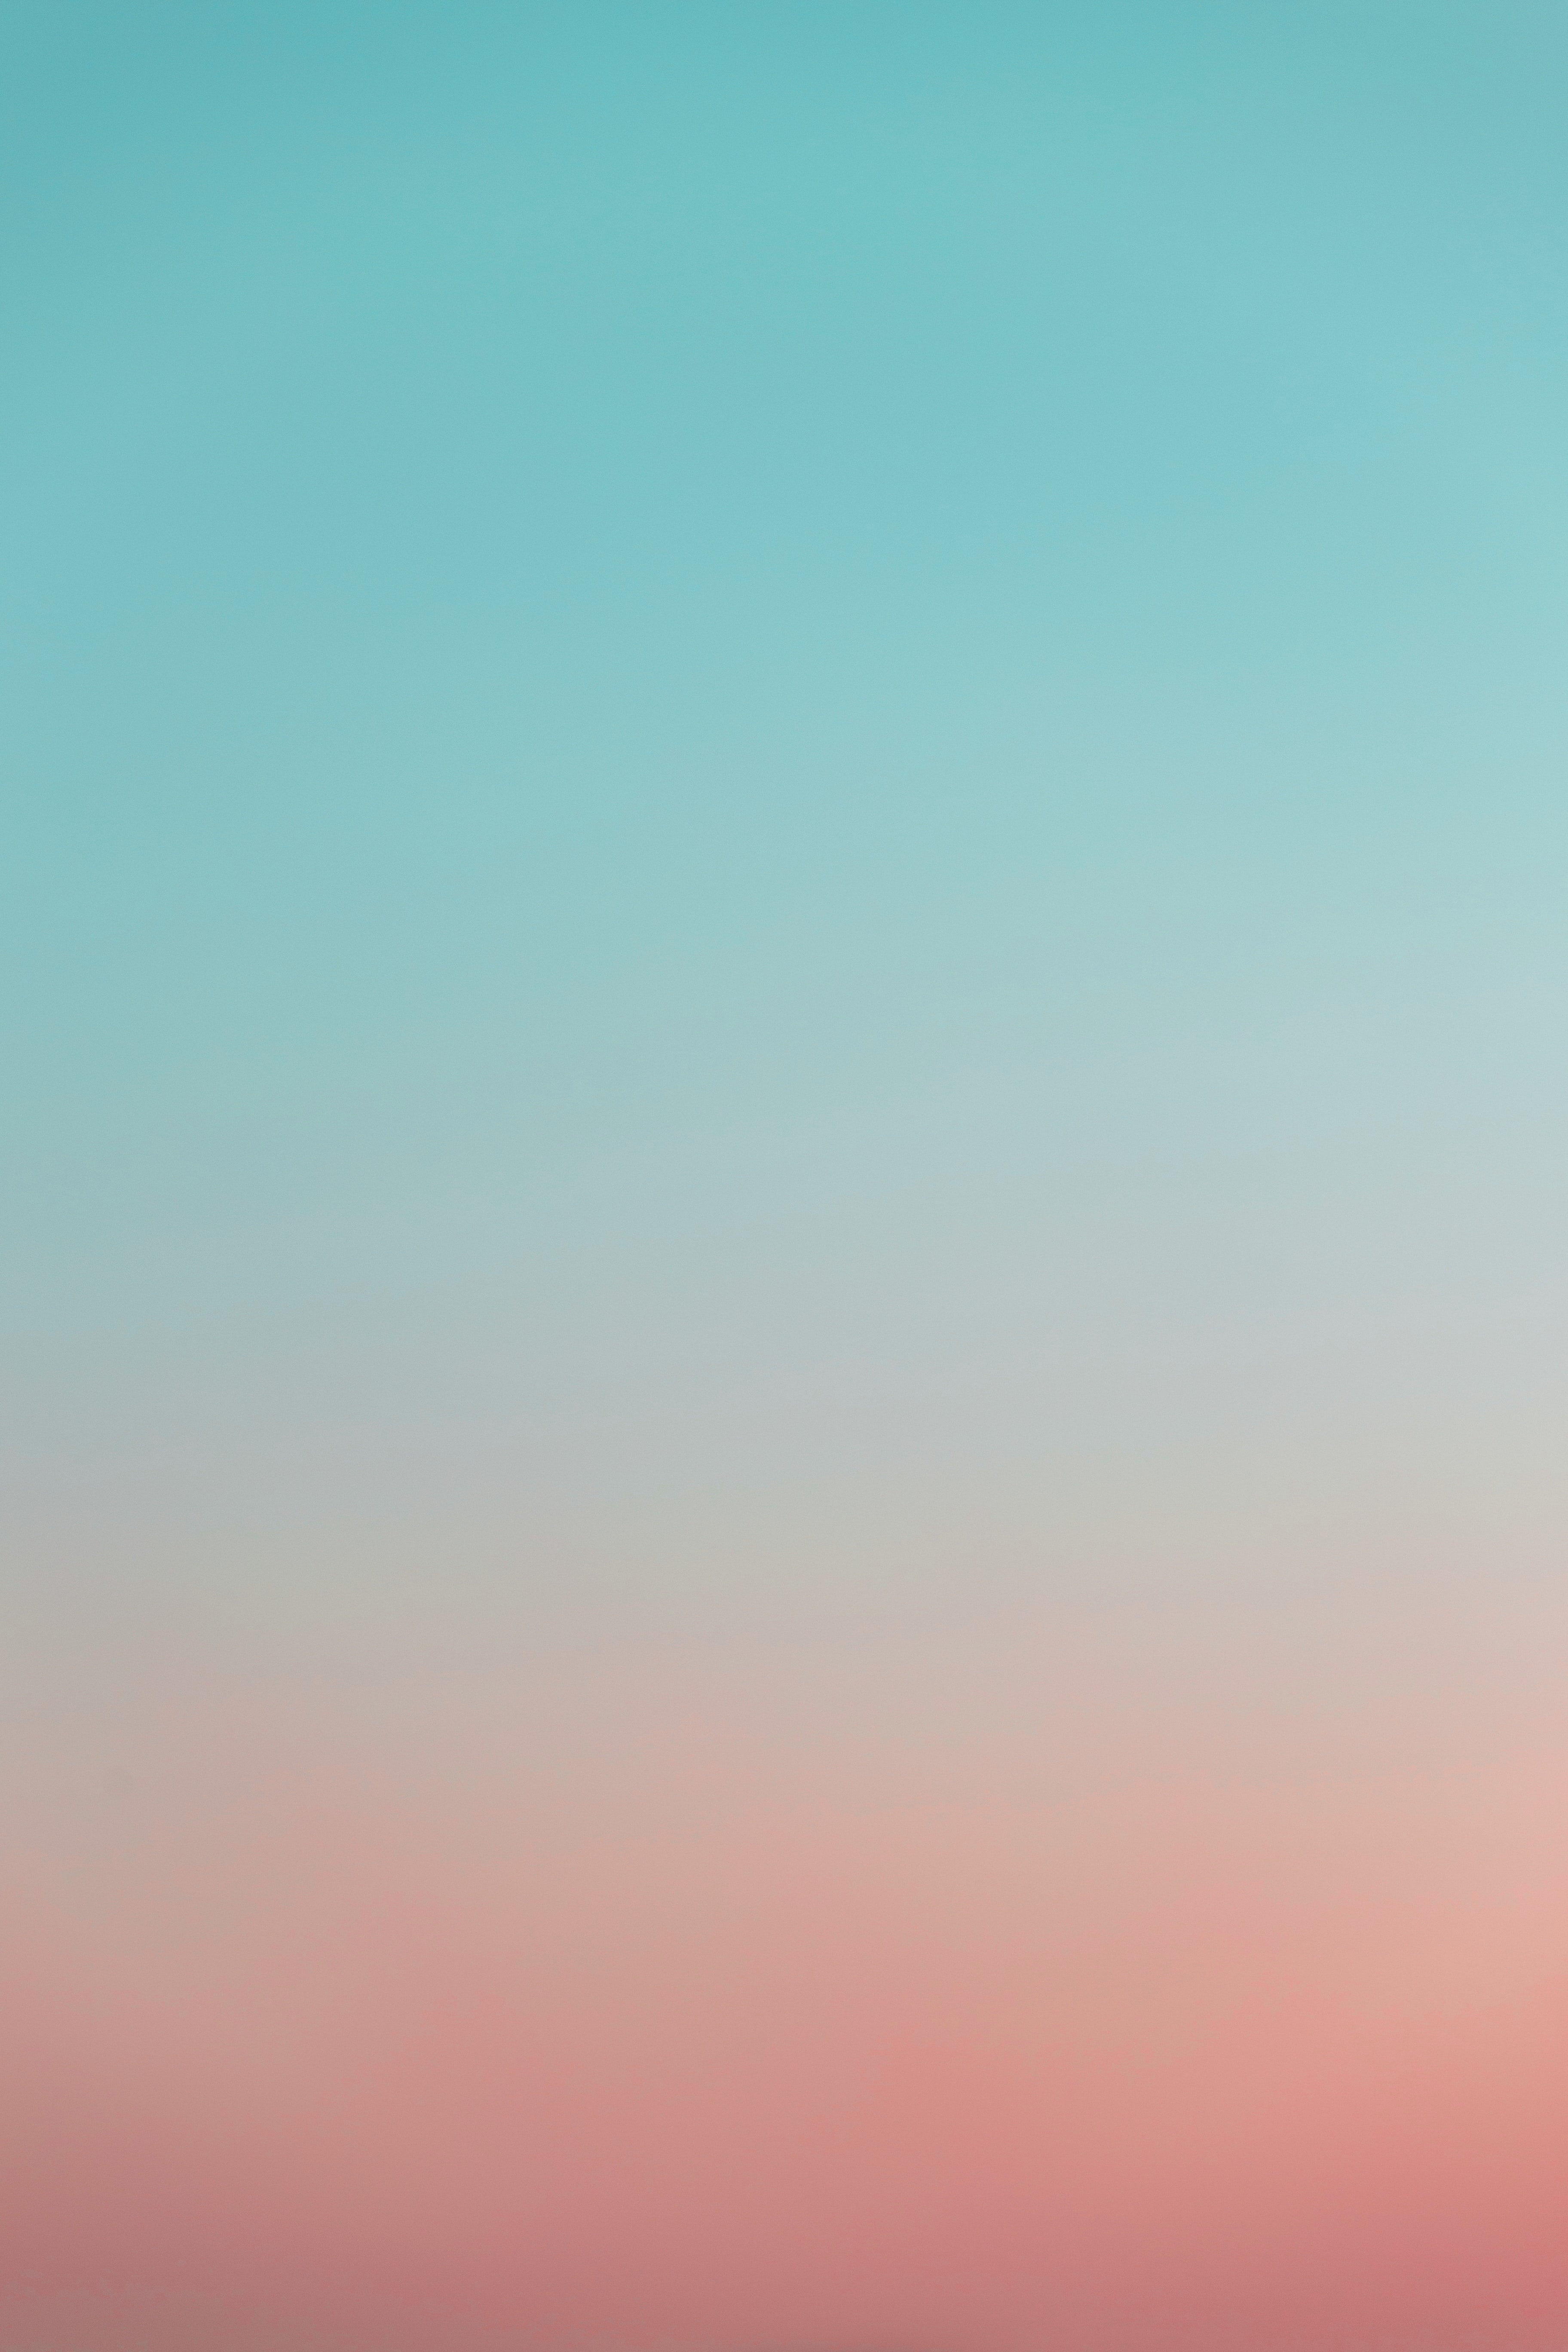 pink, abstract, blue, color, gradient UHD